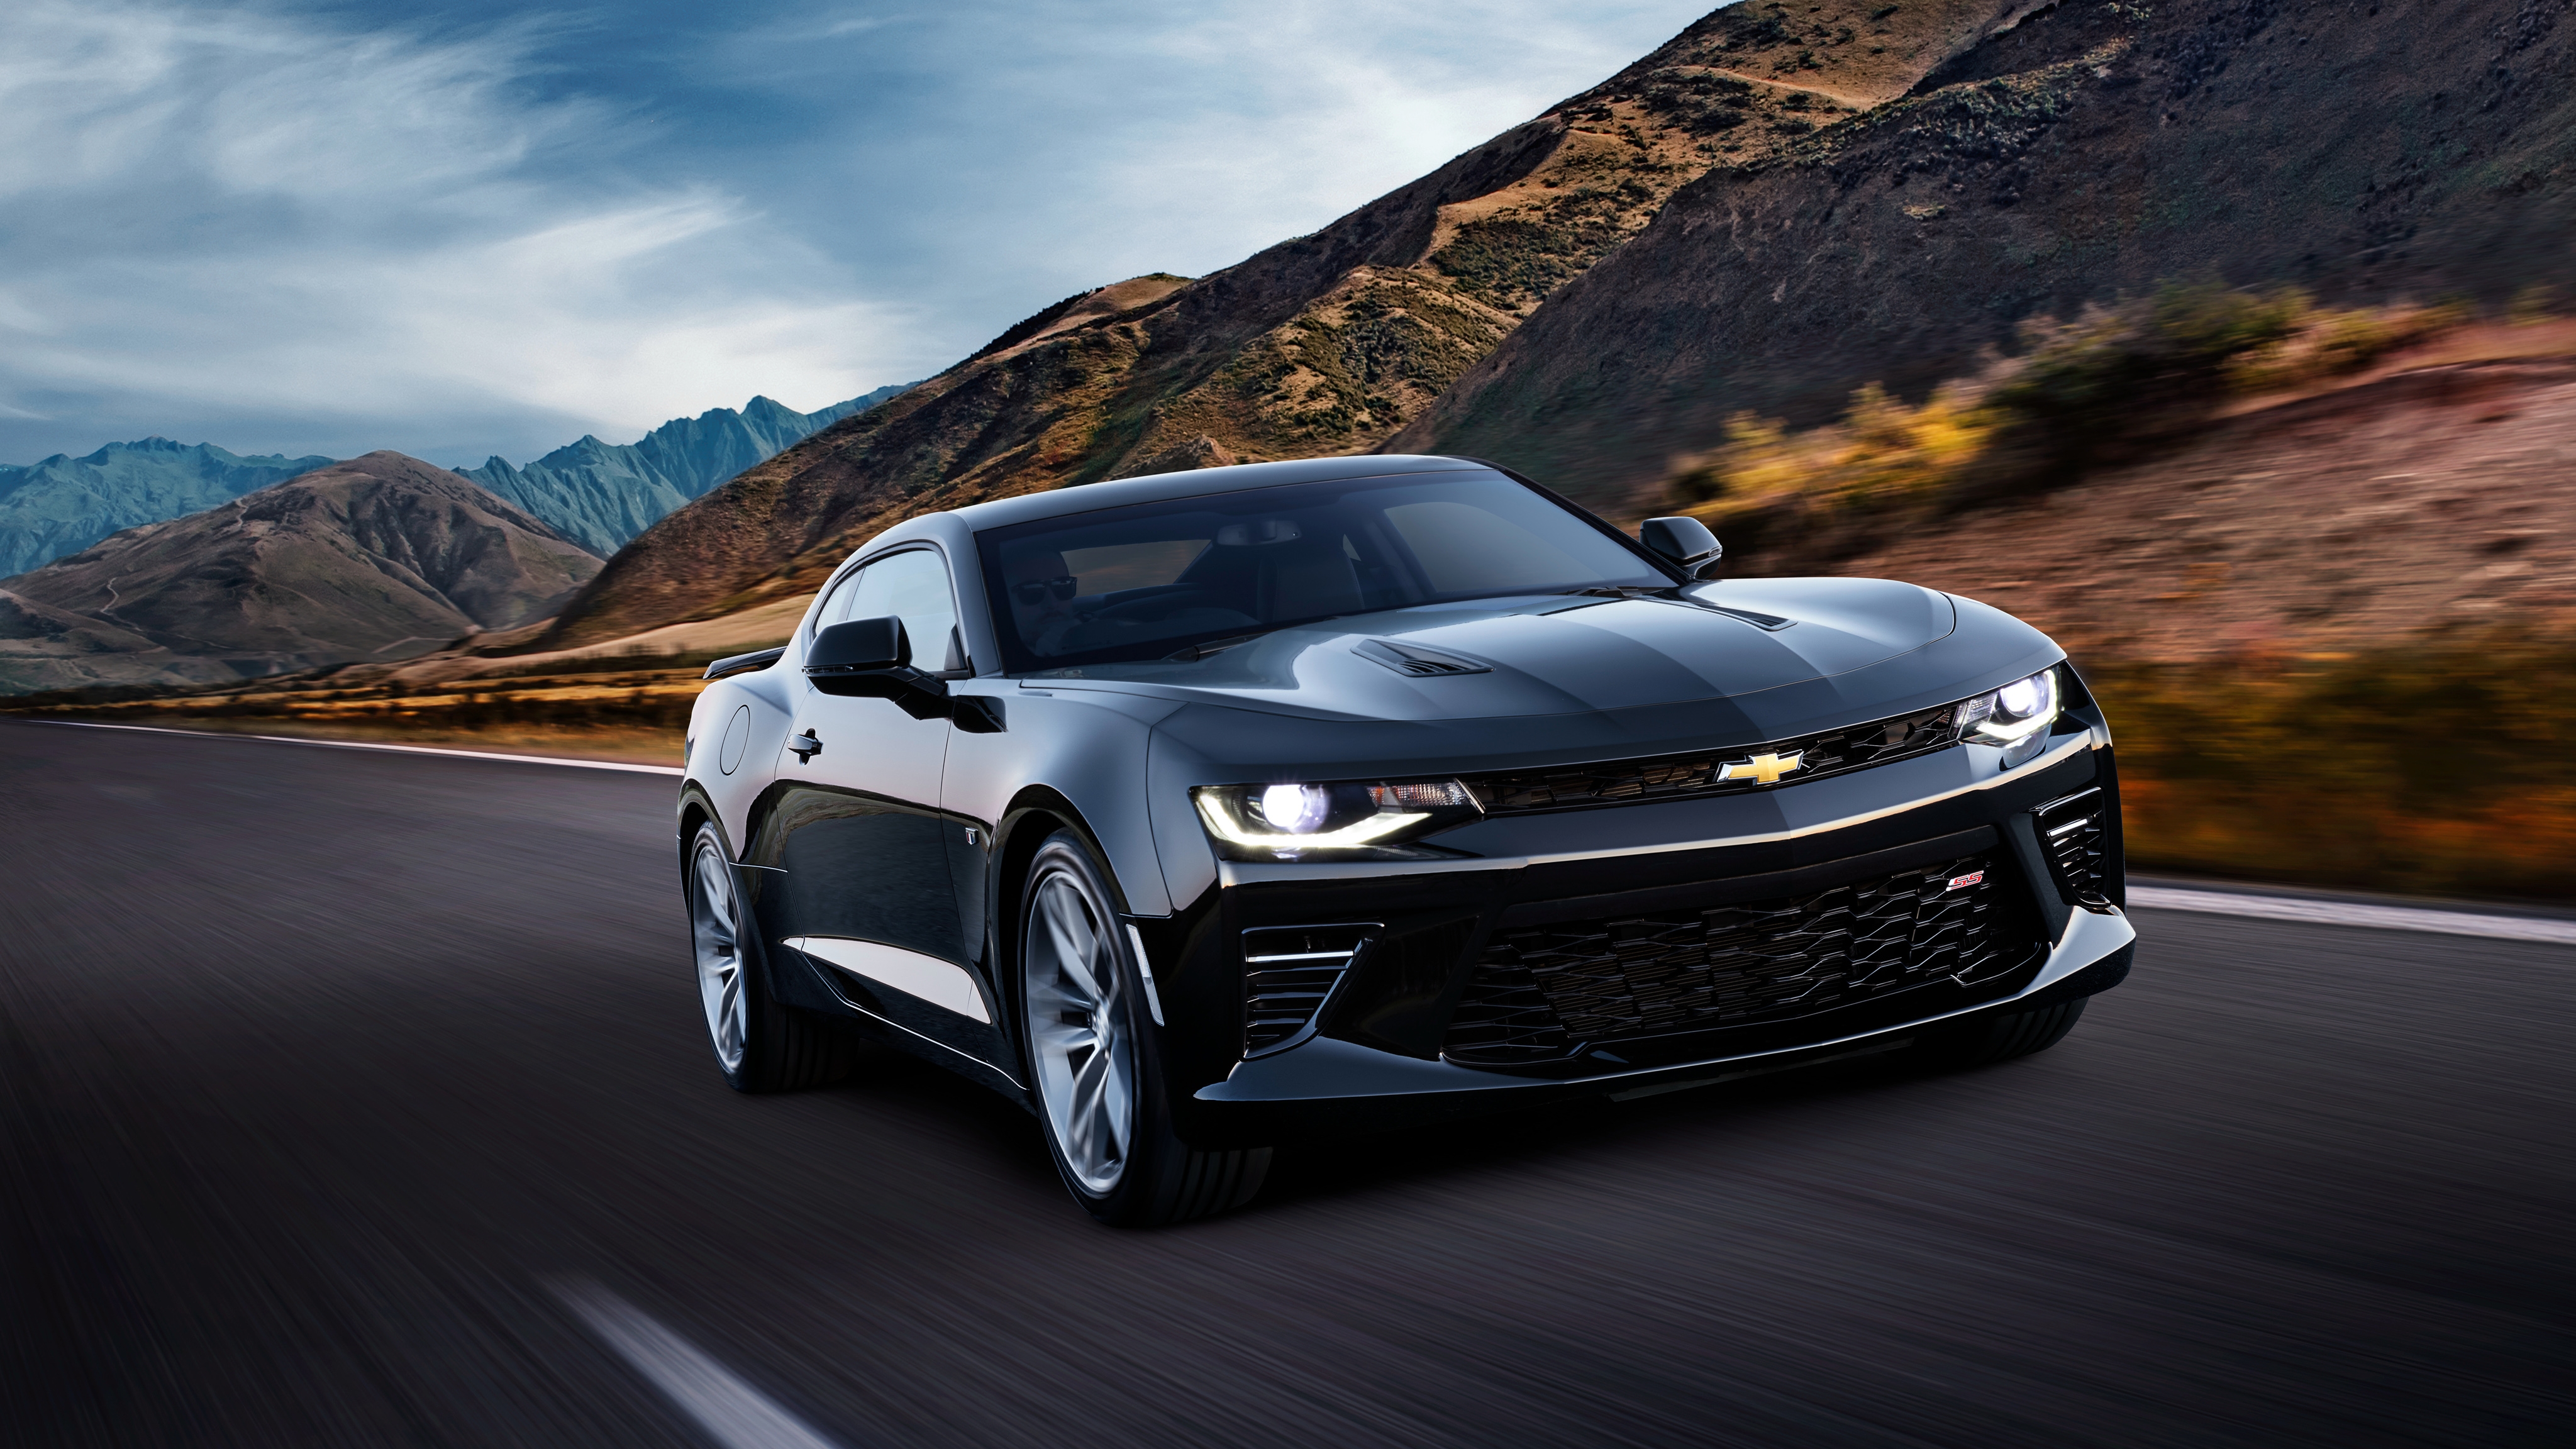 Wallpapers muscle cars road chevrolet camaro 2018 on the desktop